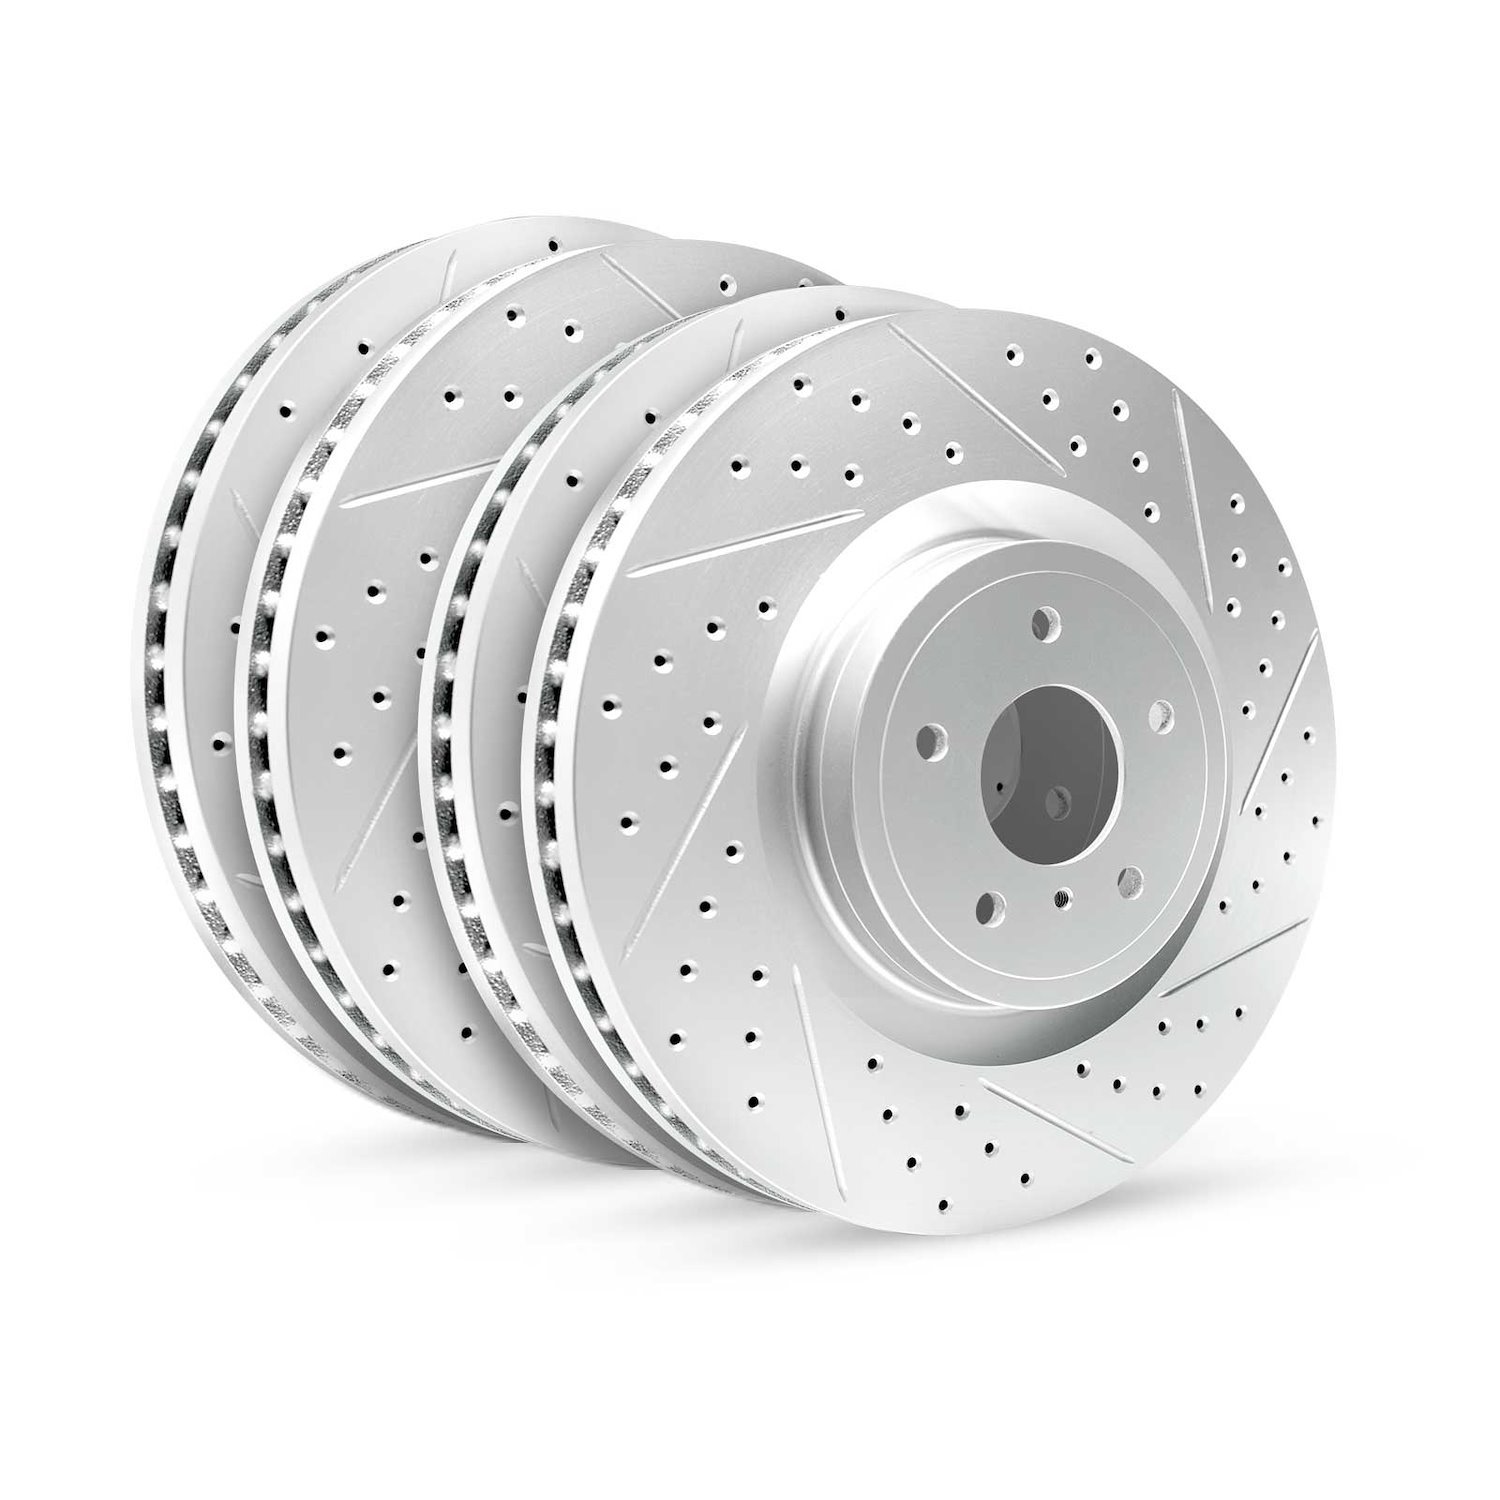 GEO-Carbon Drilled/Slotted Rotors, 2004-2017 Infiniti/Nissan, Position: Front/Rear